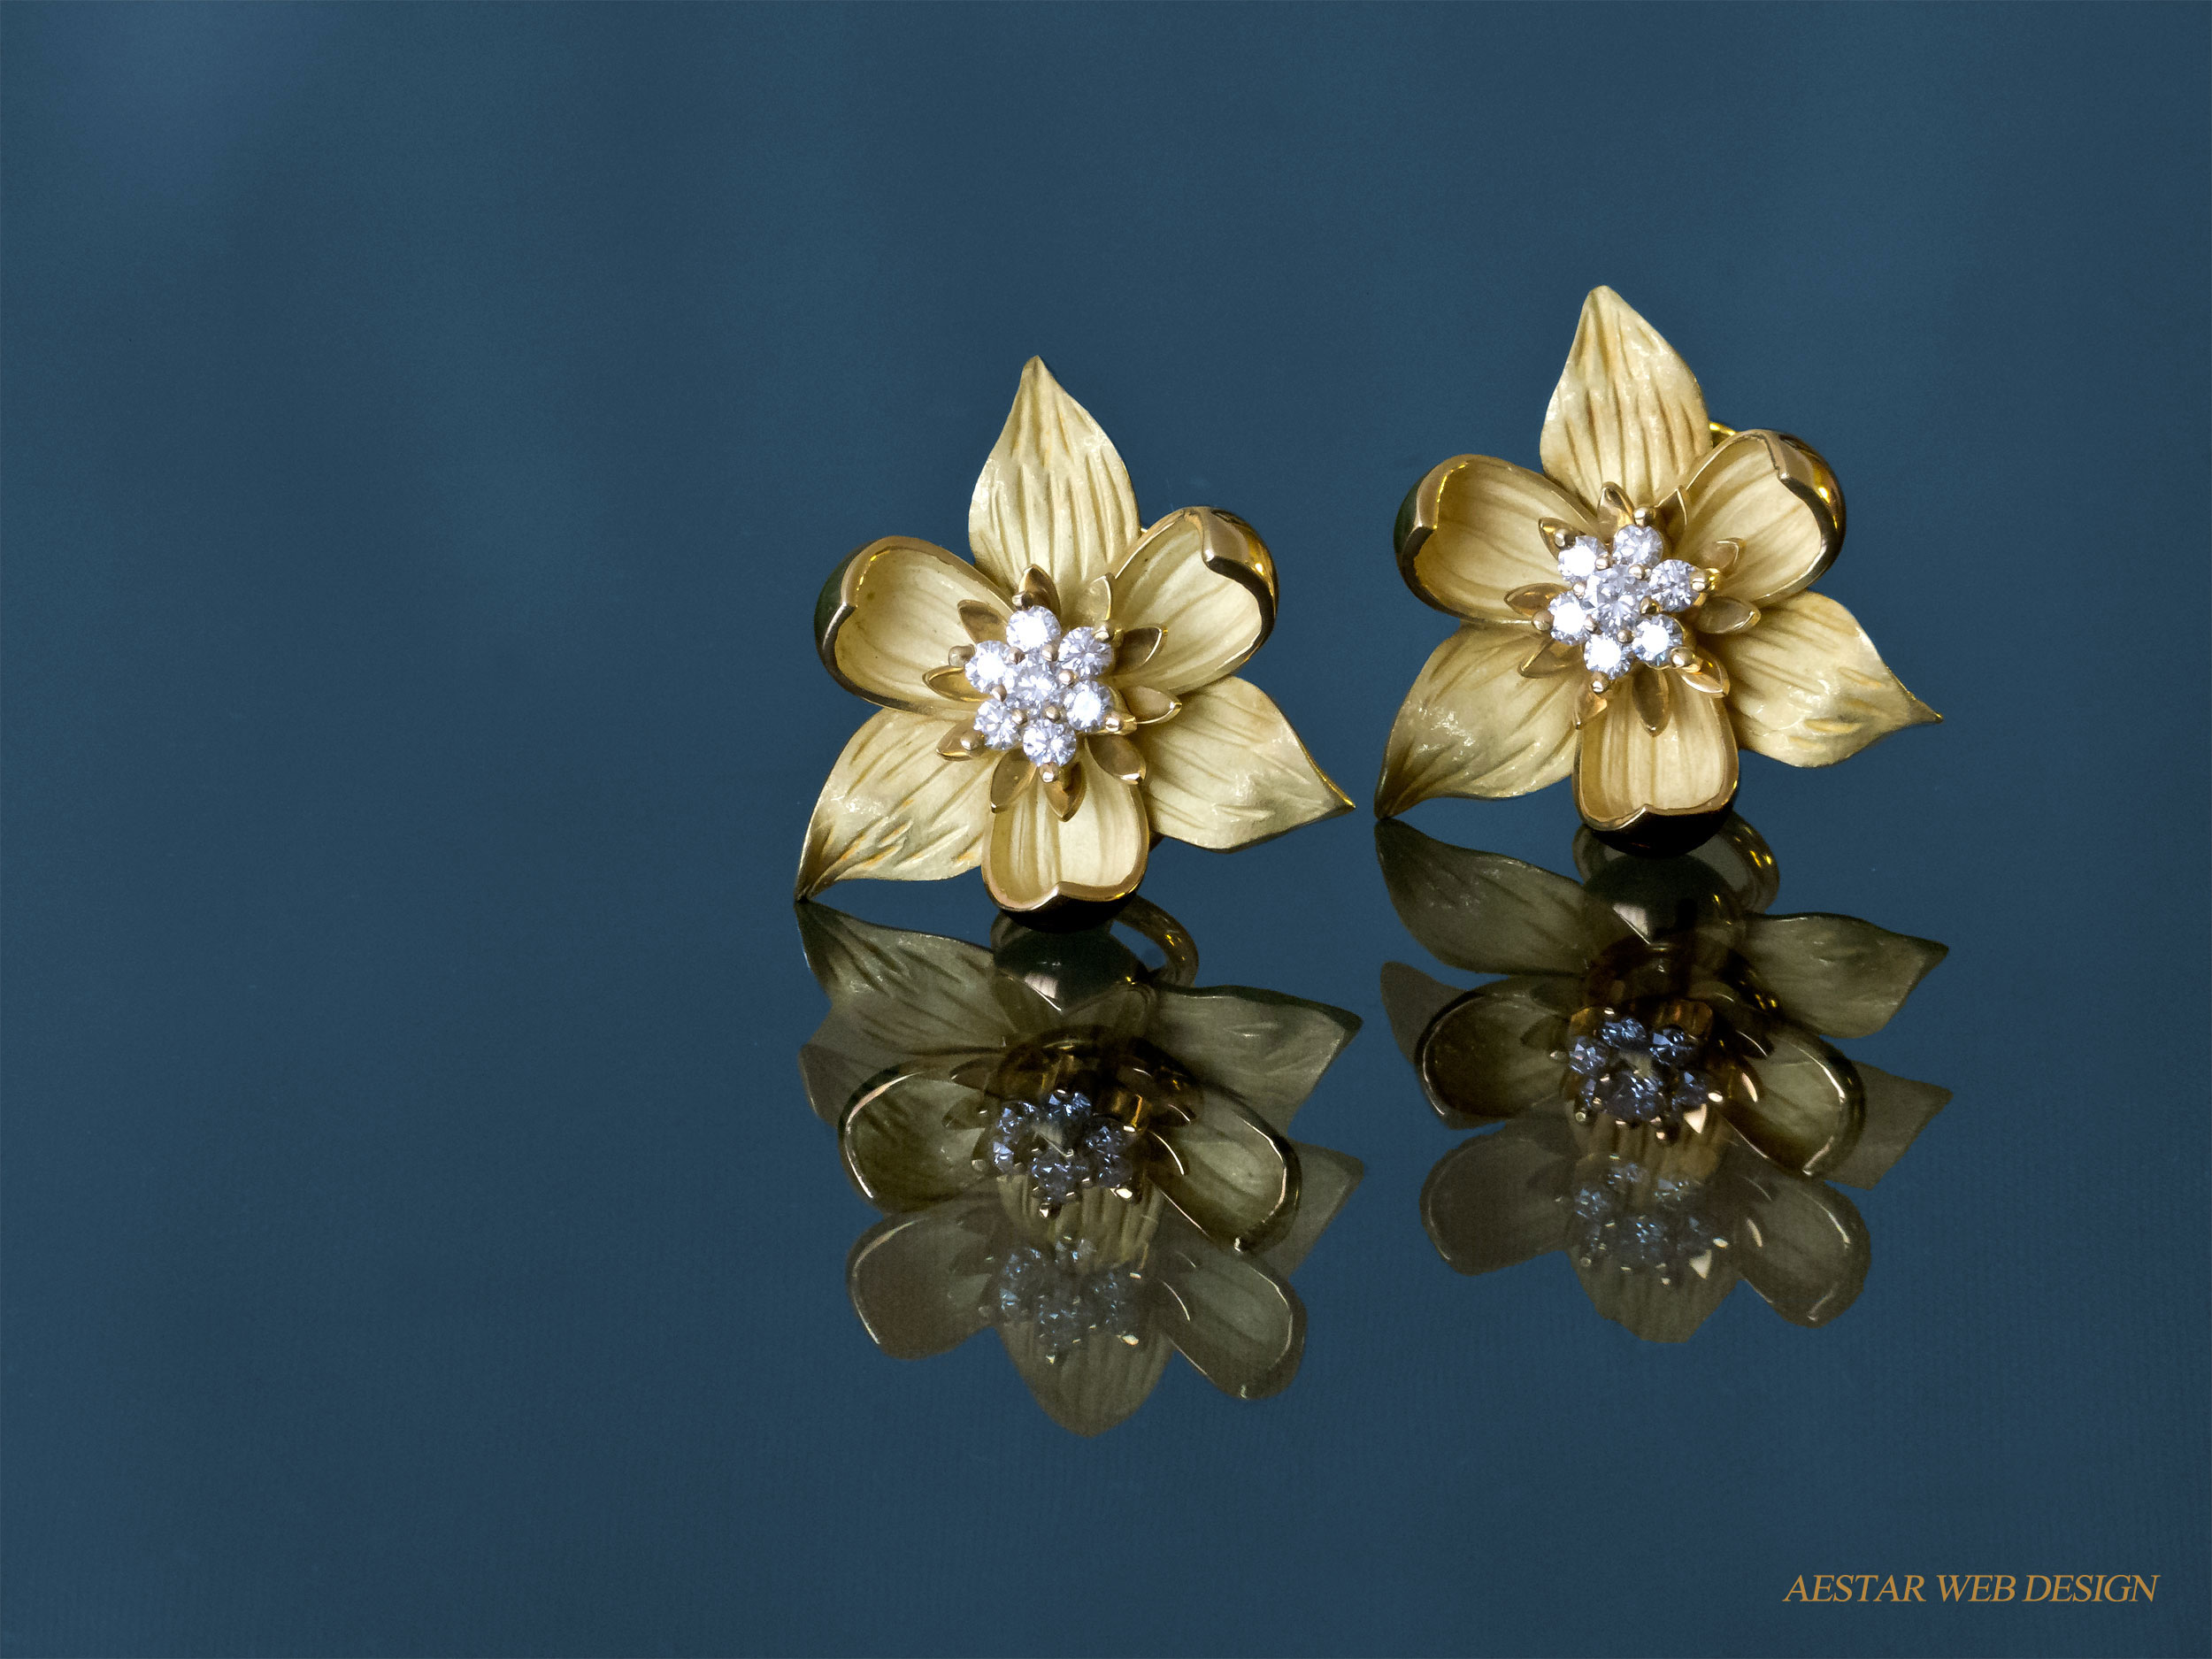 Web Product Photography, Jewelry, Earrings, New York City